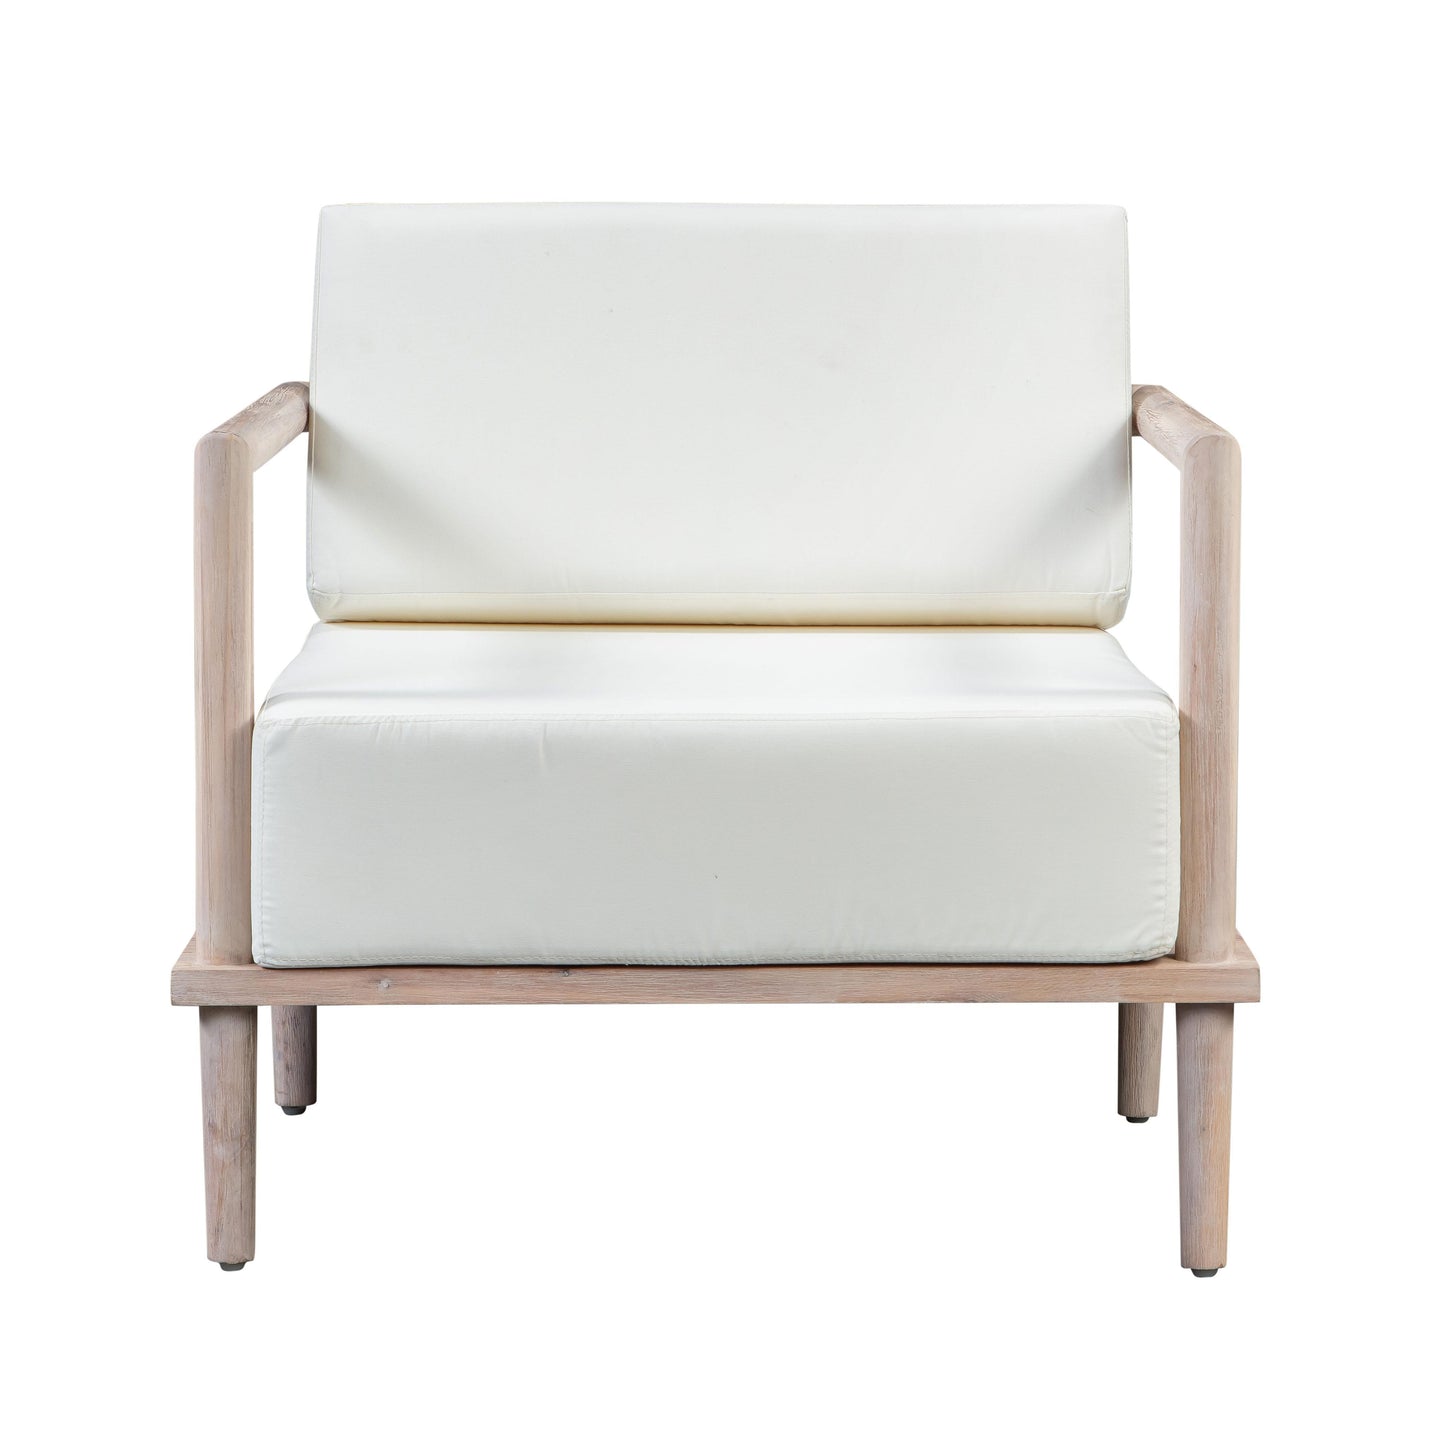 Emerson - Outdoor Lounge Chair - Cream